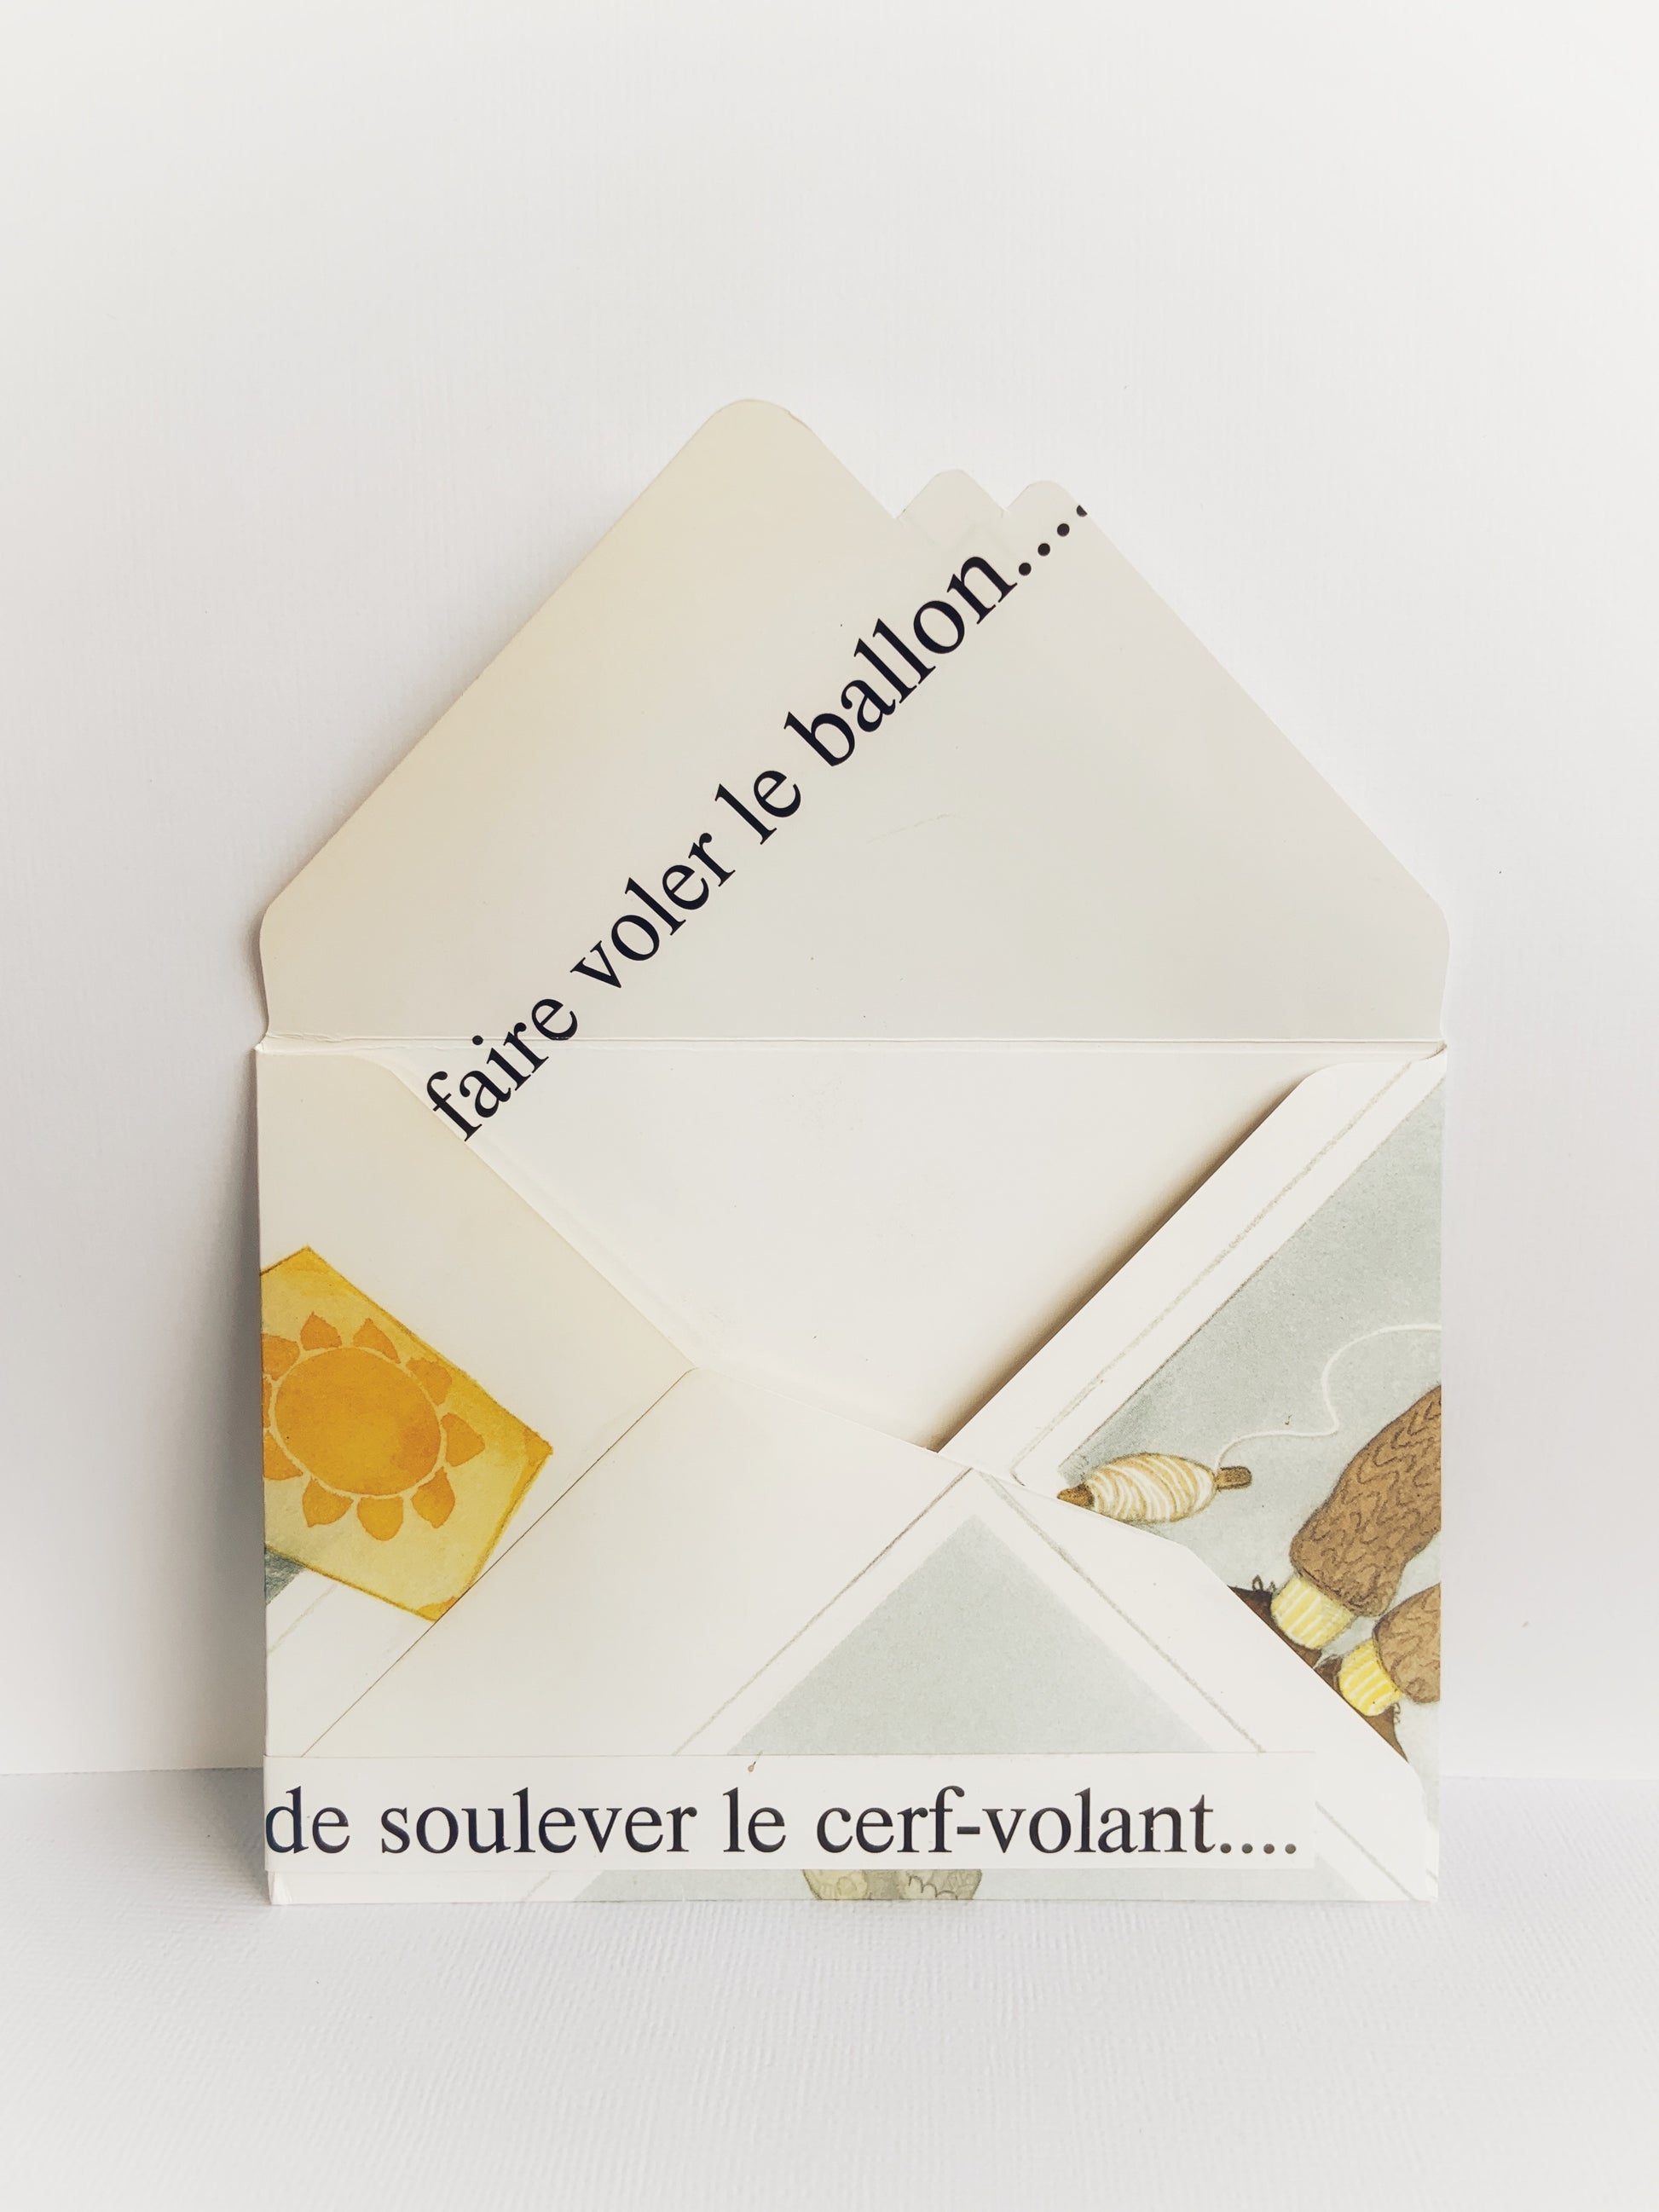 The back of a handmade envelope with the flap open that shows 'faire voler le ballon' across it and 'de soulever le cerf-volant' on the bottom.